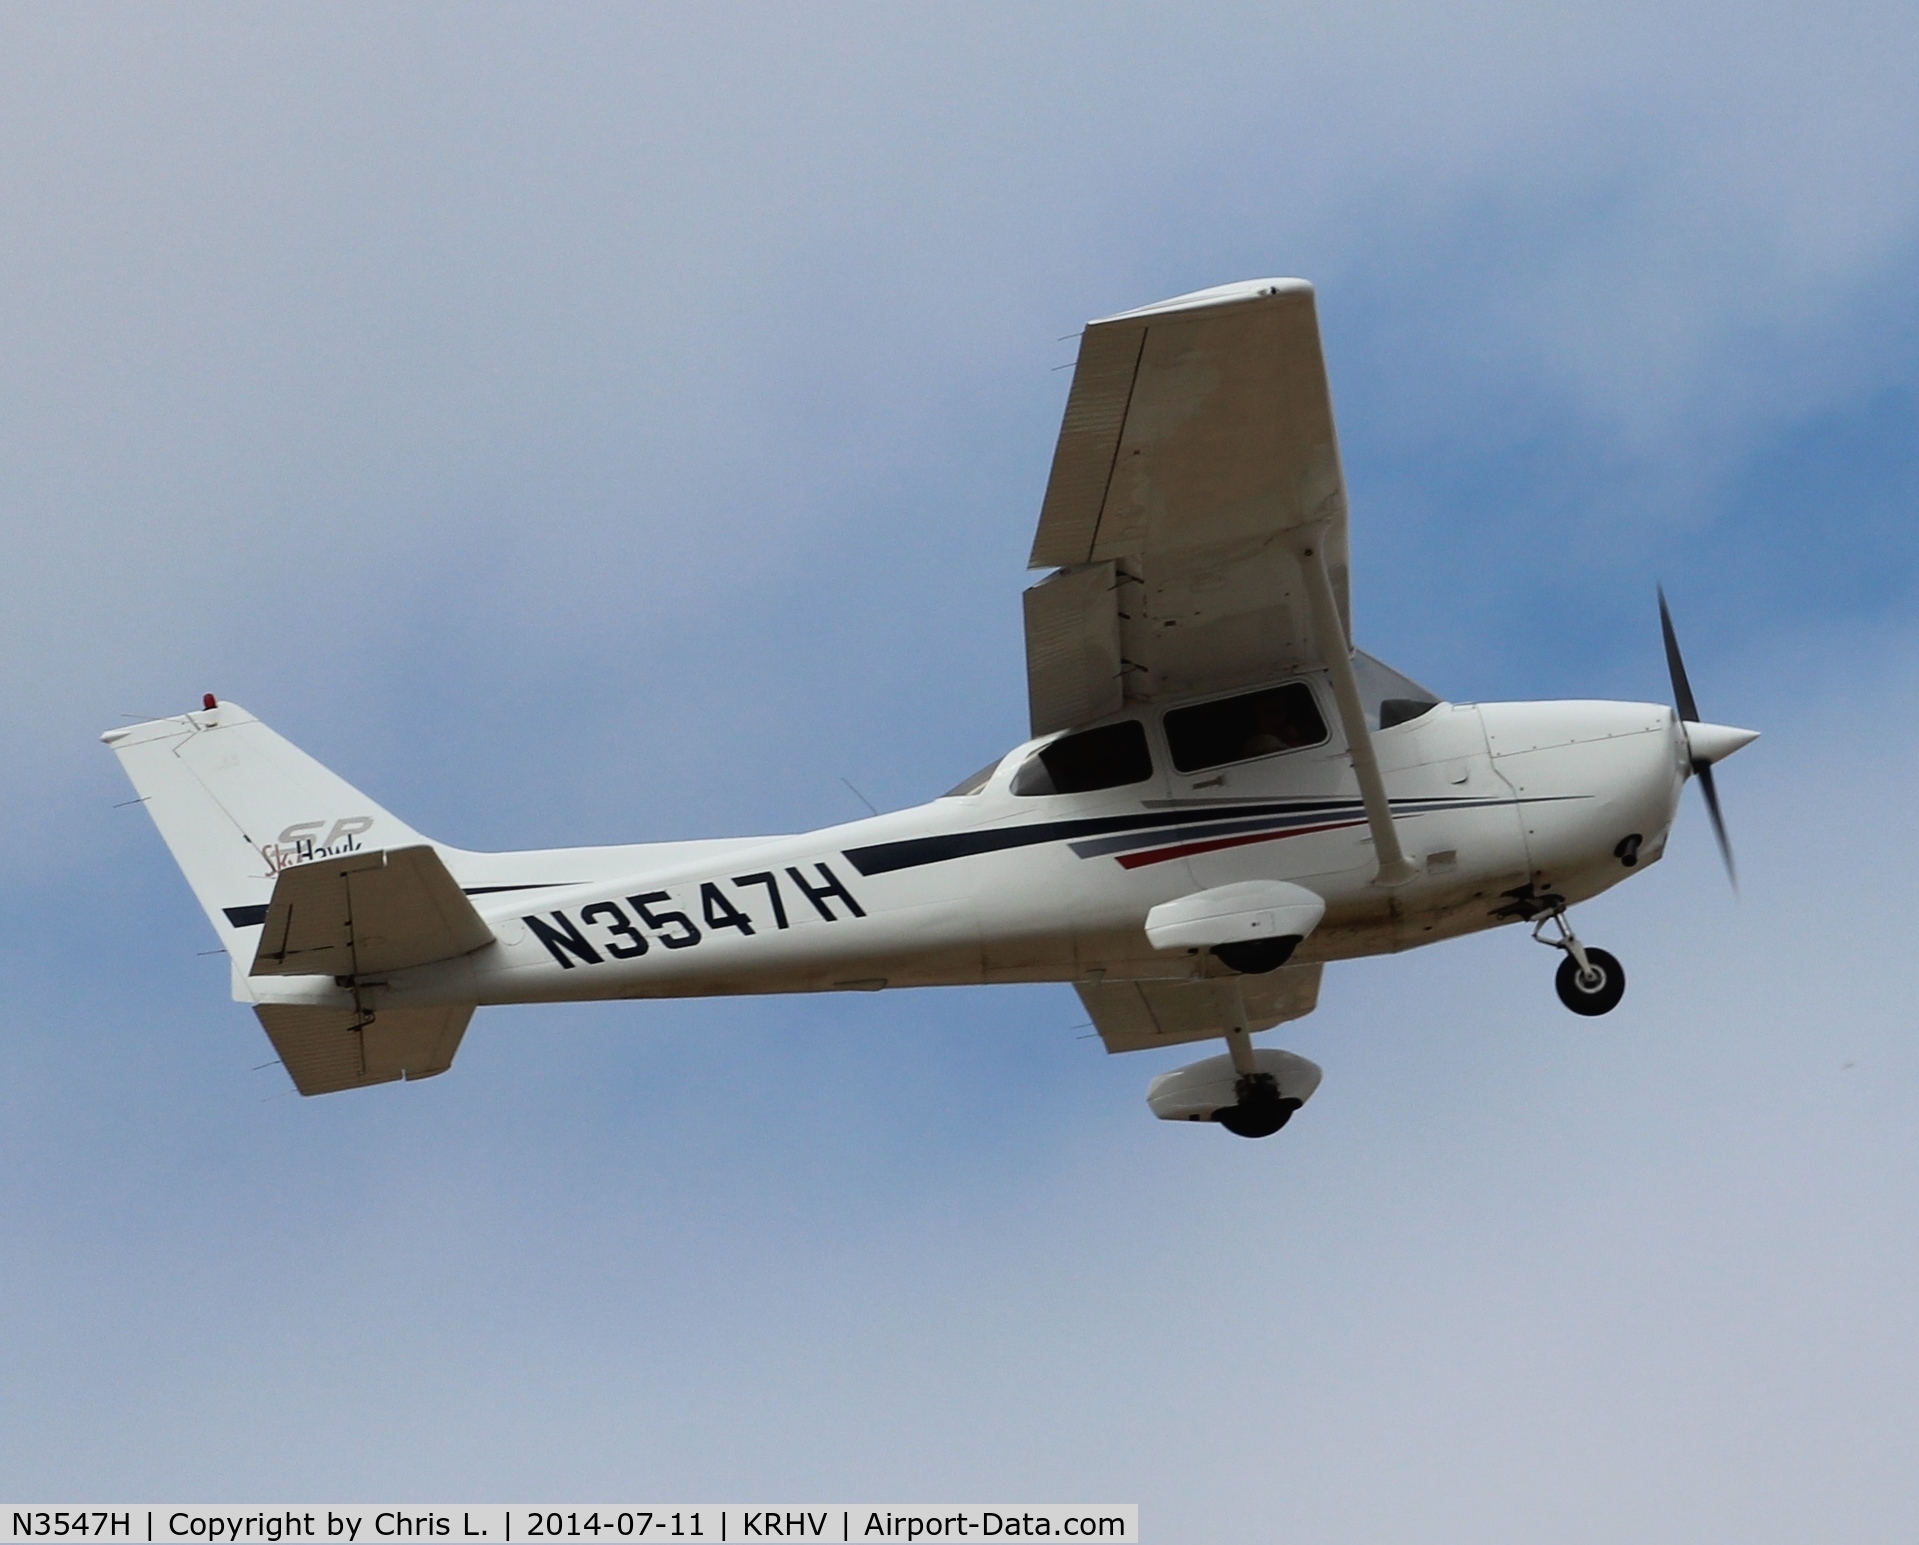 N3547H, Cessna 172S C/N 172S8886, Locally-based Cessna 172S departing runway 31R during the 2014 Reid Hillview Airport Day, San Jose, CA.